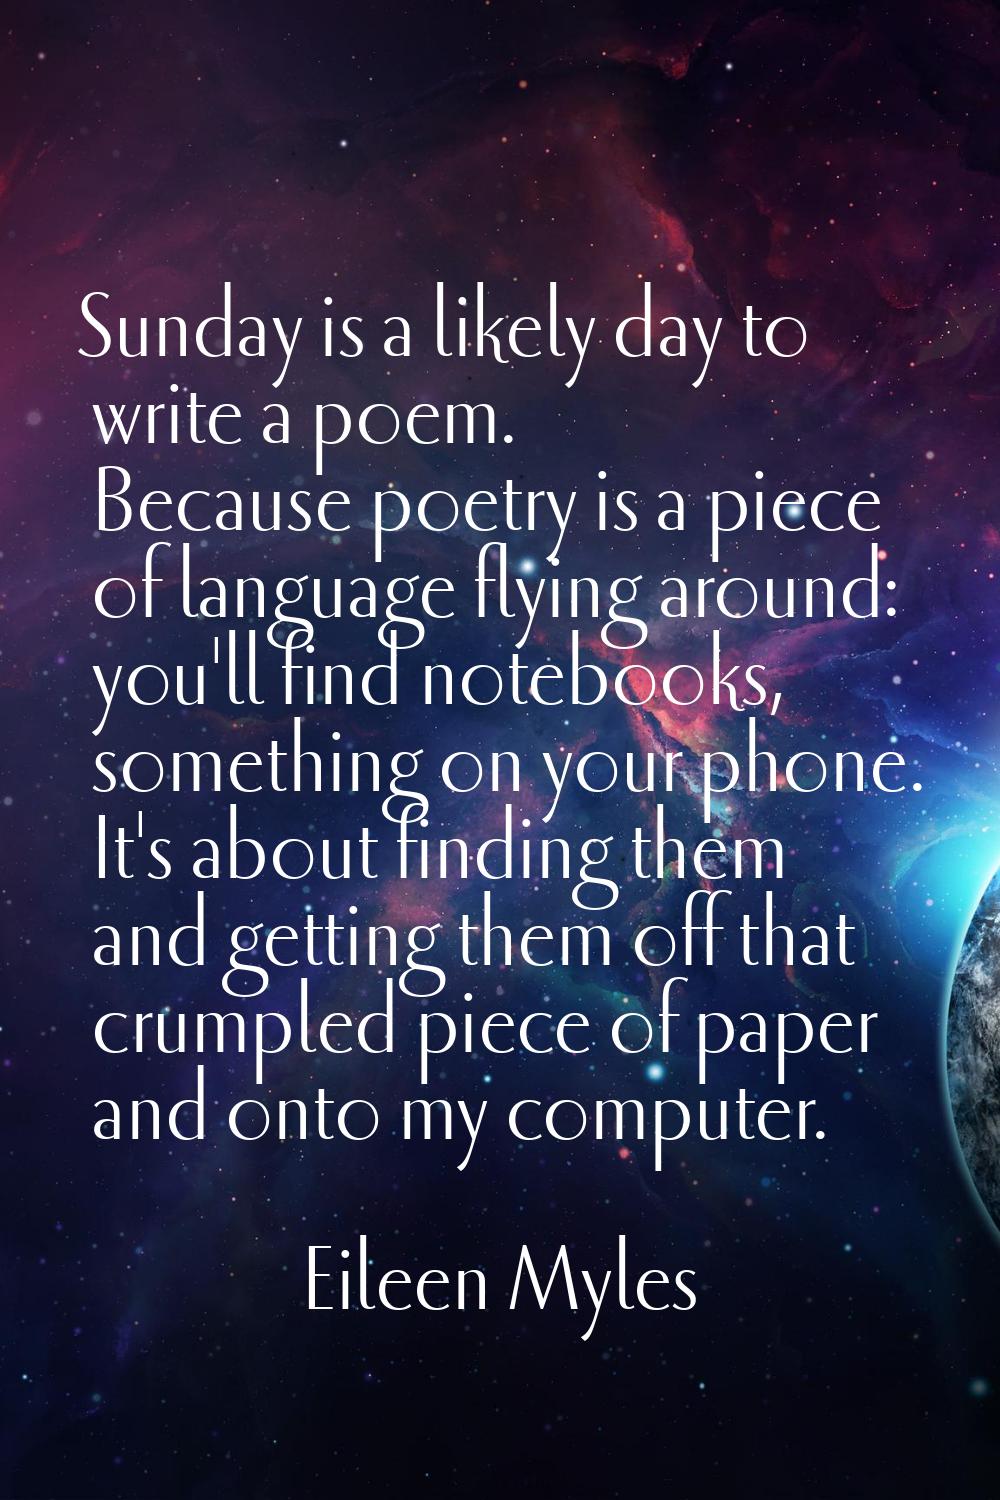 Sunday is a likely day to write a poem. Because poetry is a piece of language flying around: you'll